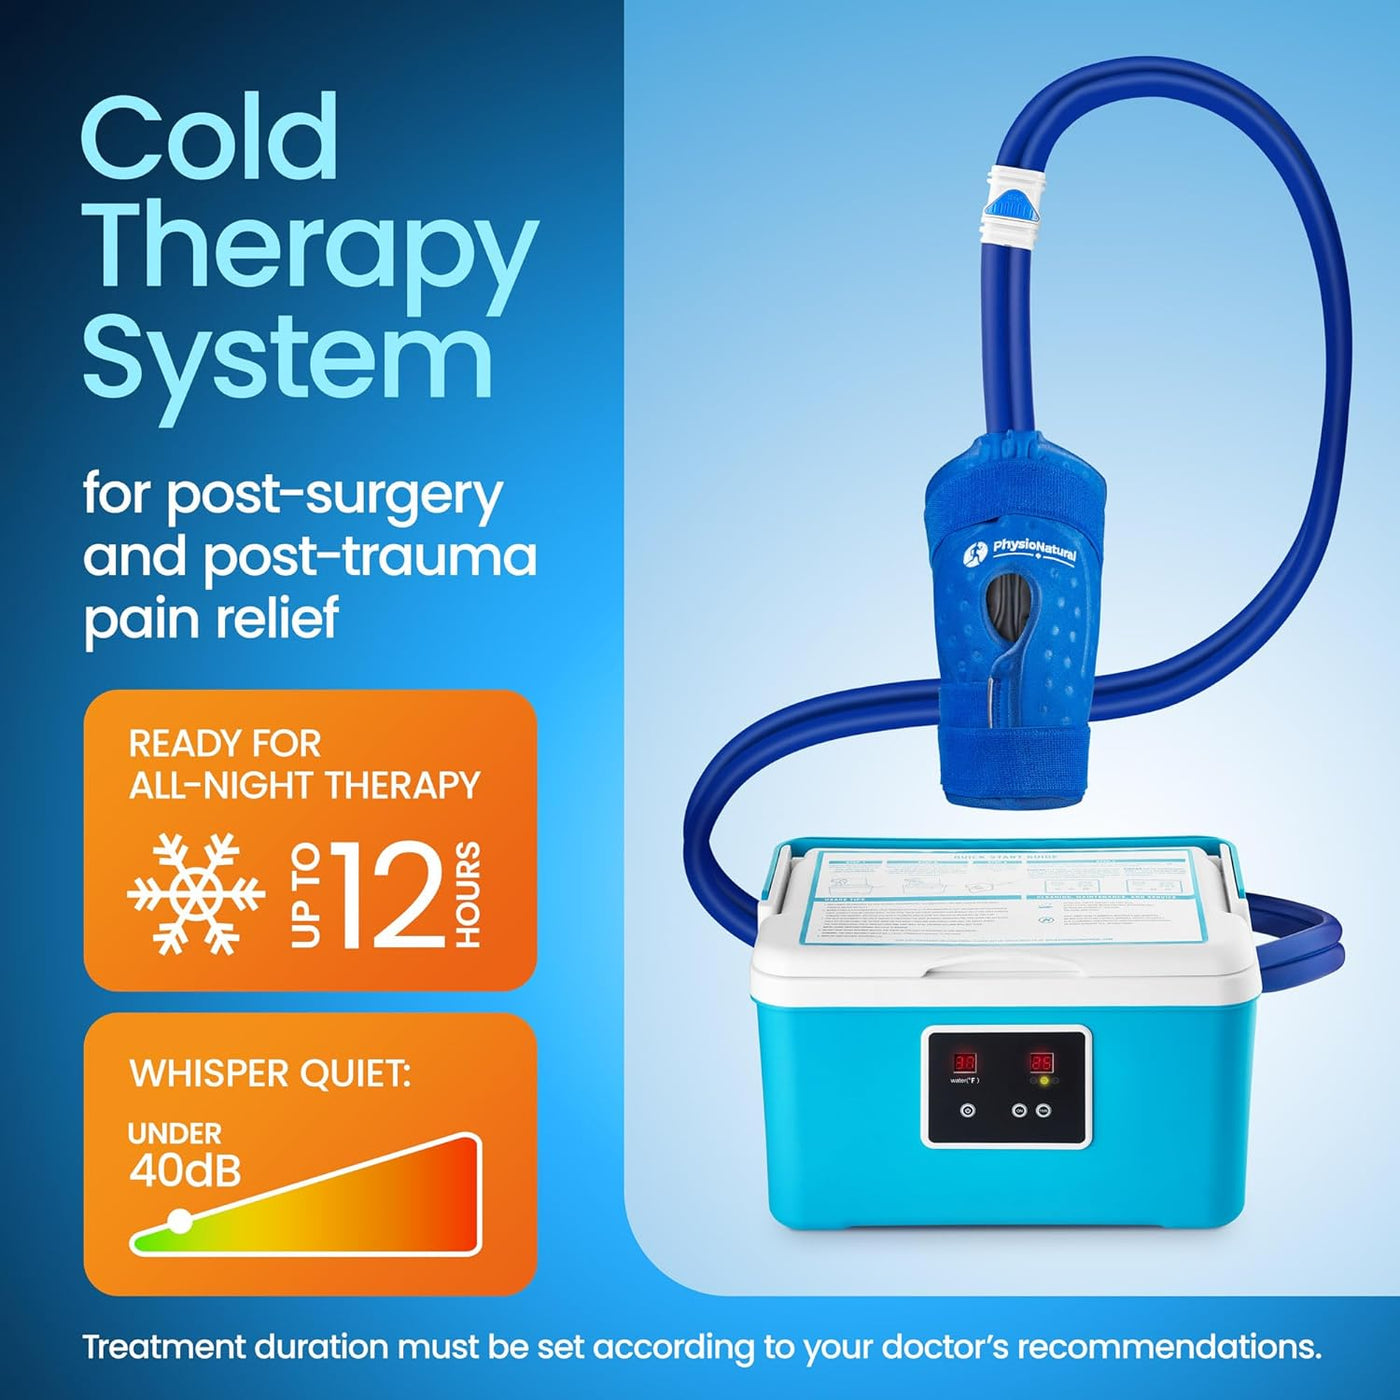 Cold Therapy Machine Cryotherapy Freeze Kit System for Post-Surgery Care - $115